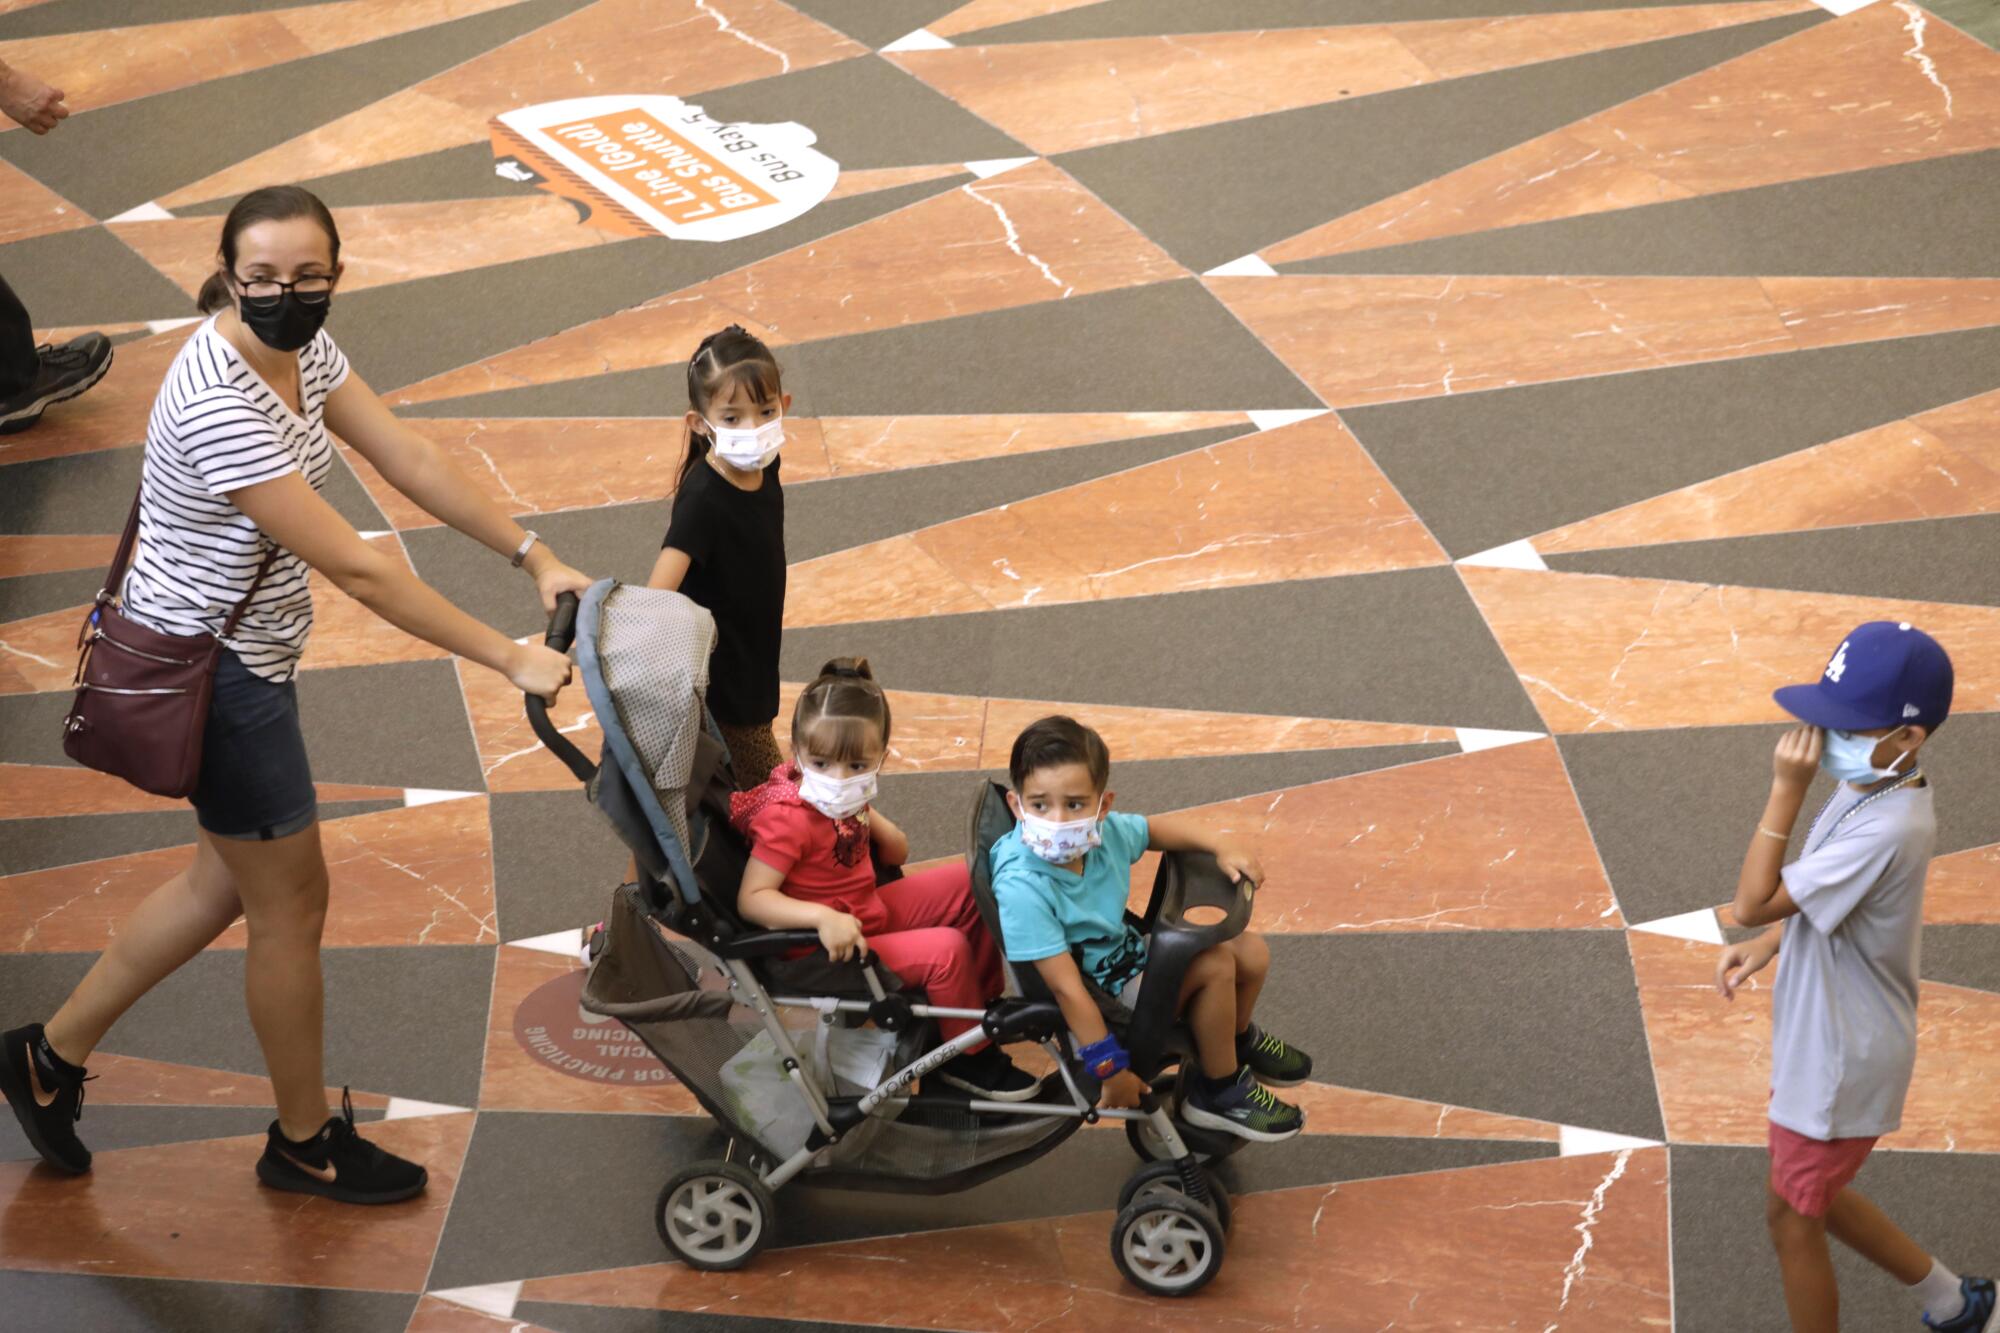 A woman pushes a double stroller with children. All wear masks.